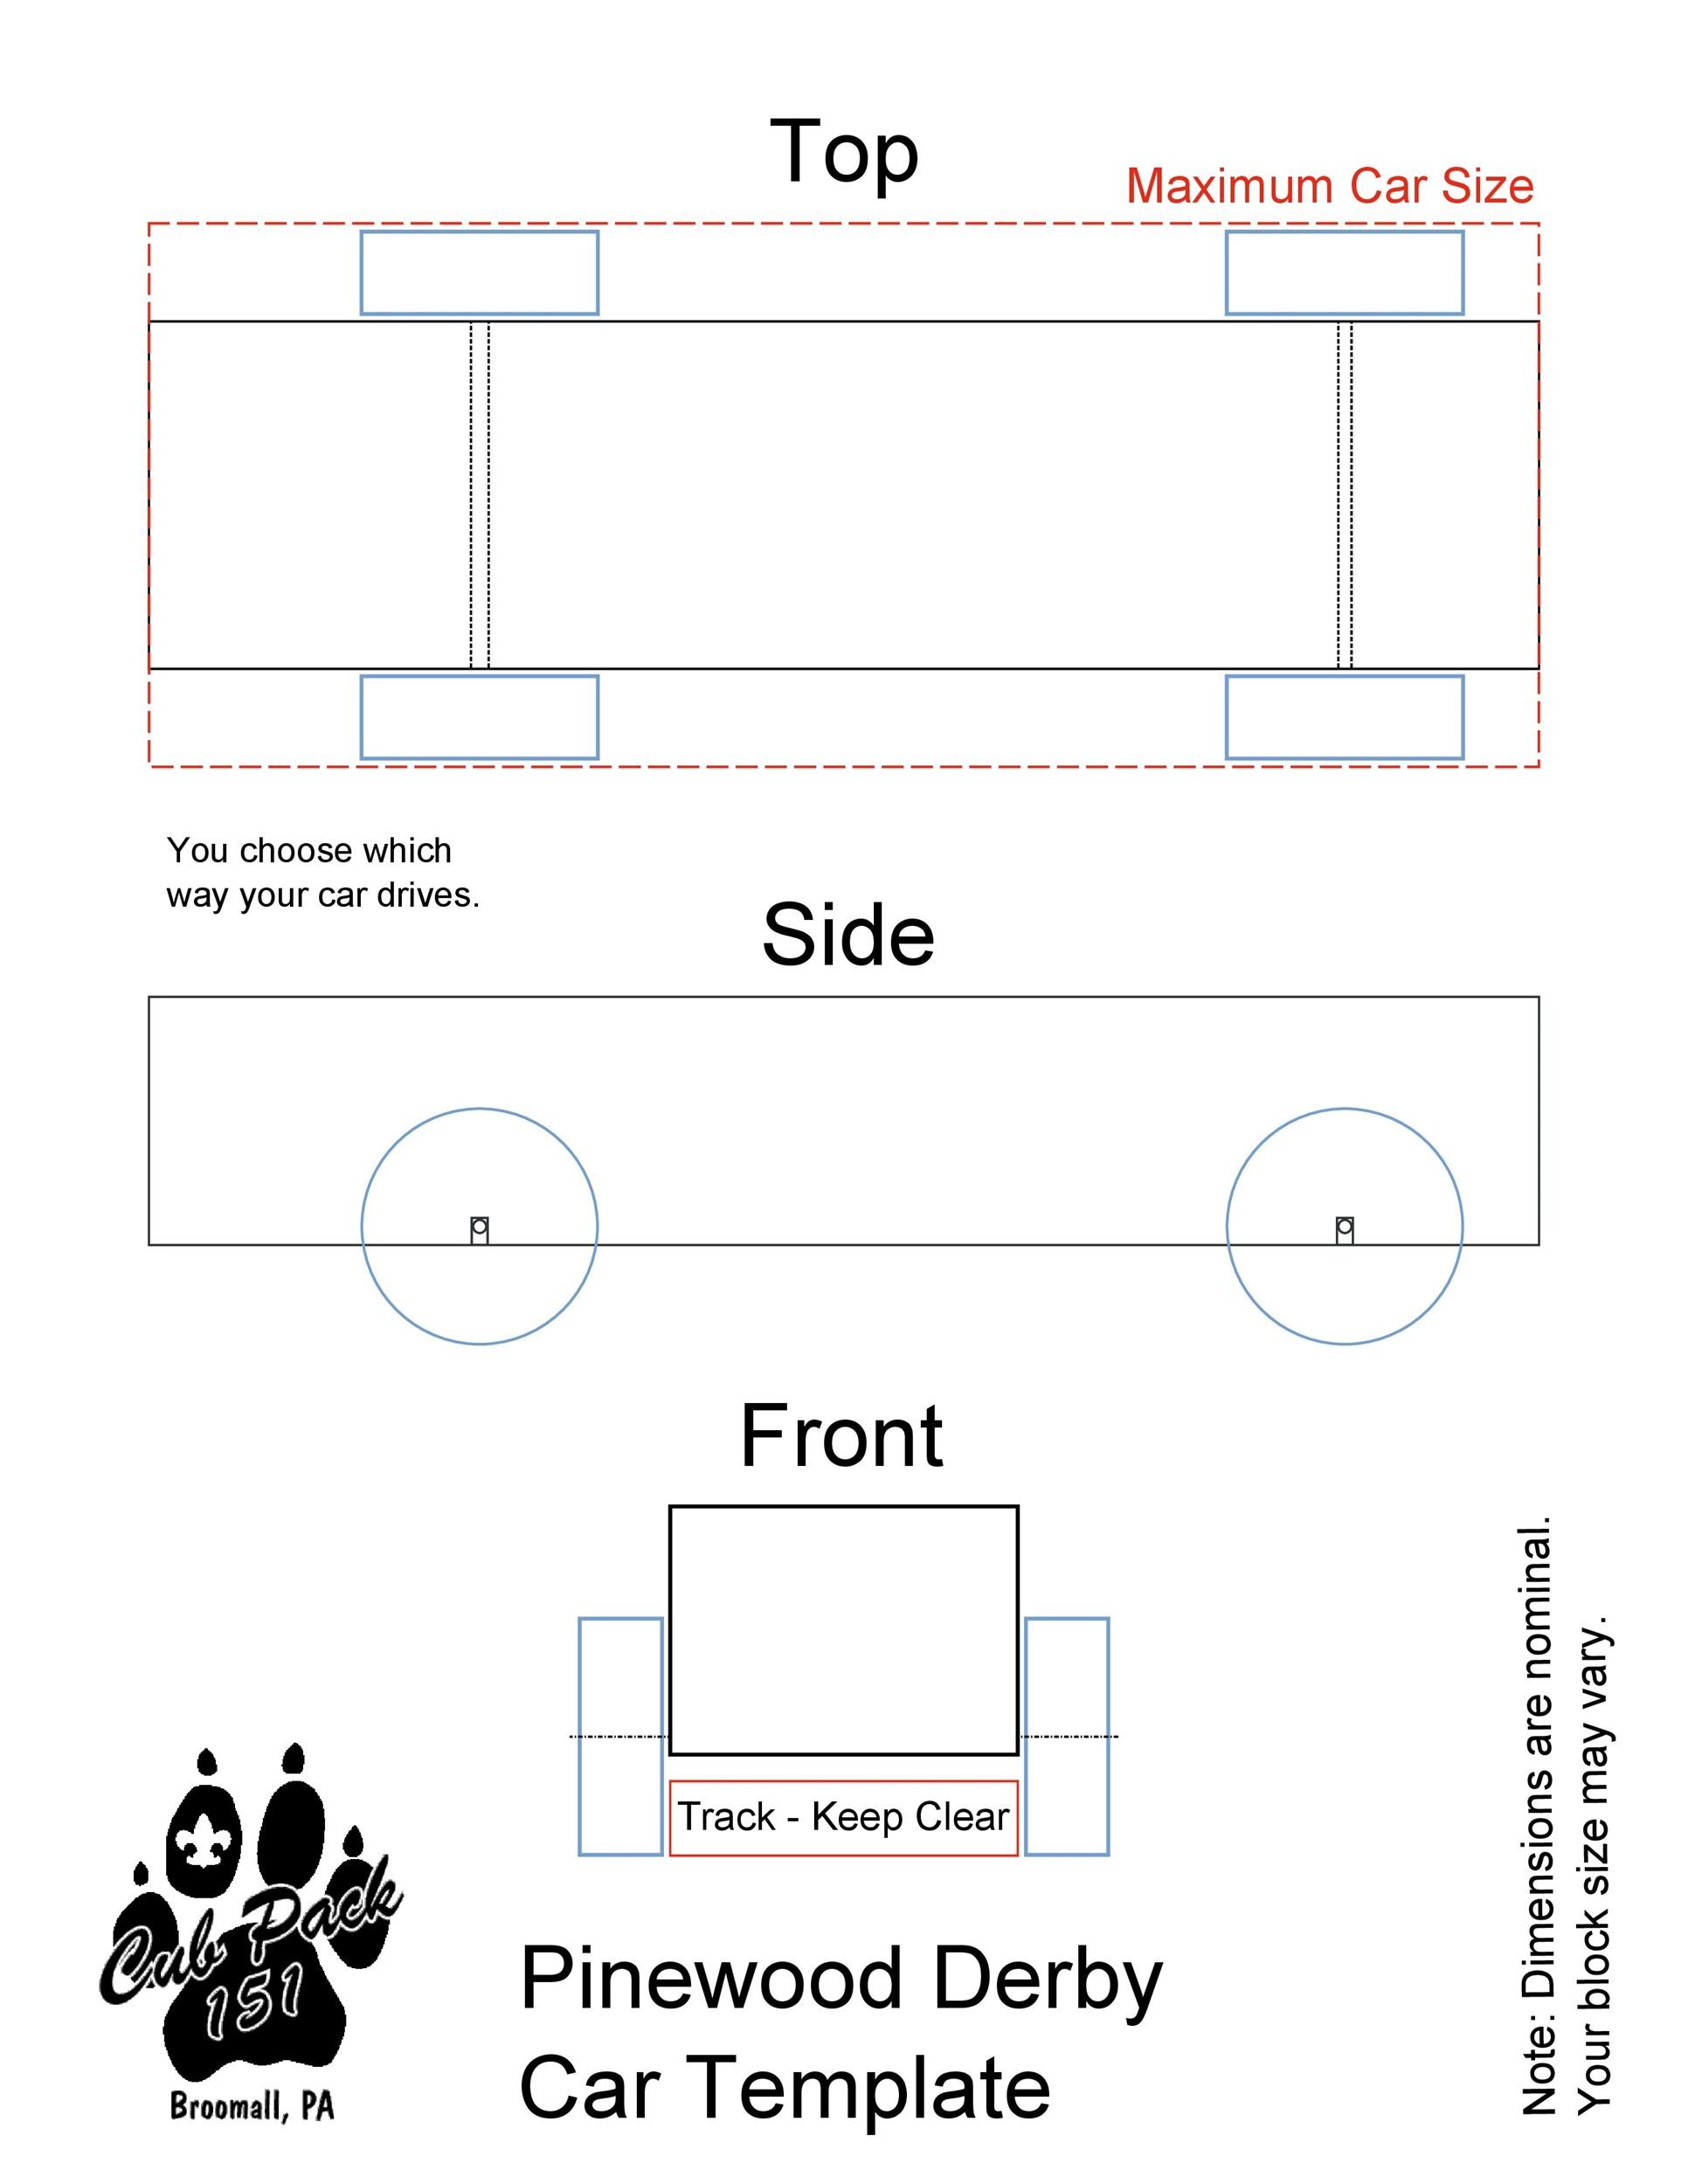 Pinewood Derby Car Templates Printable That are Nerdy Hunter Blog